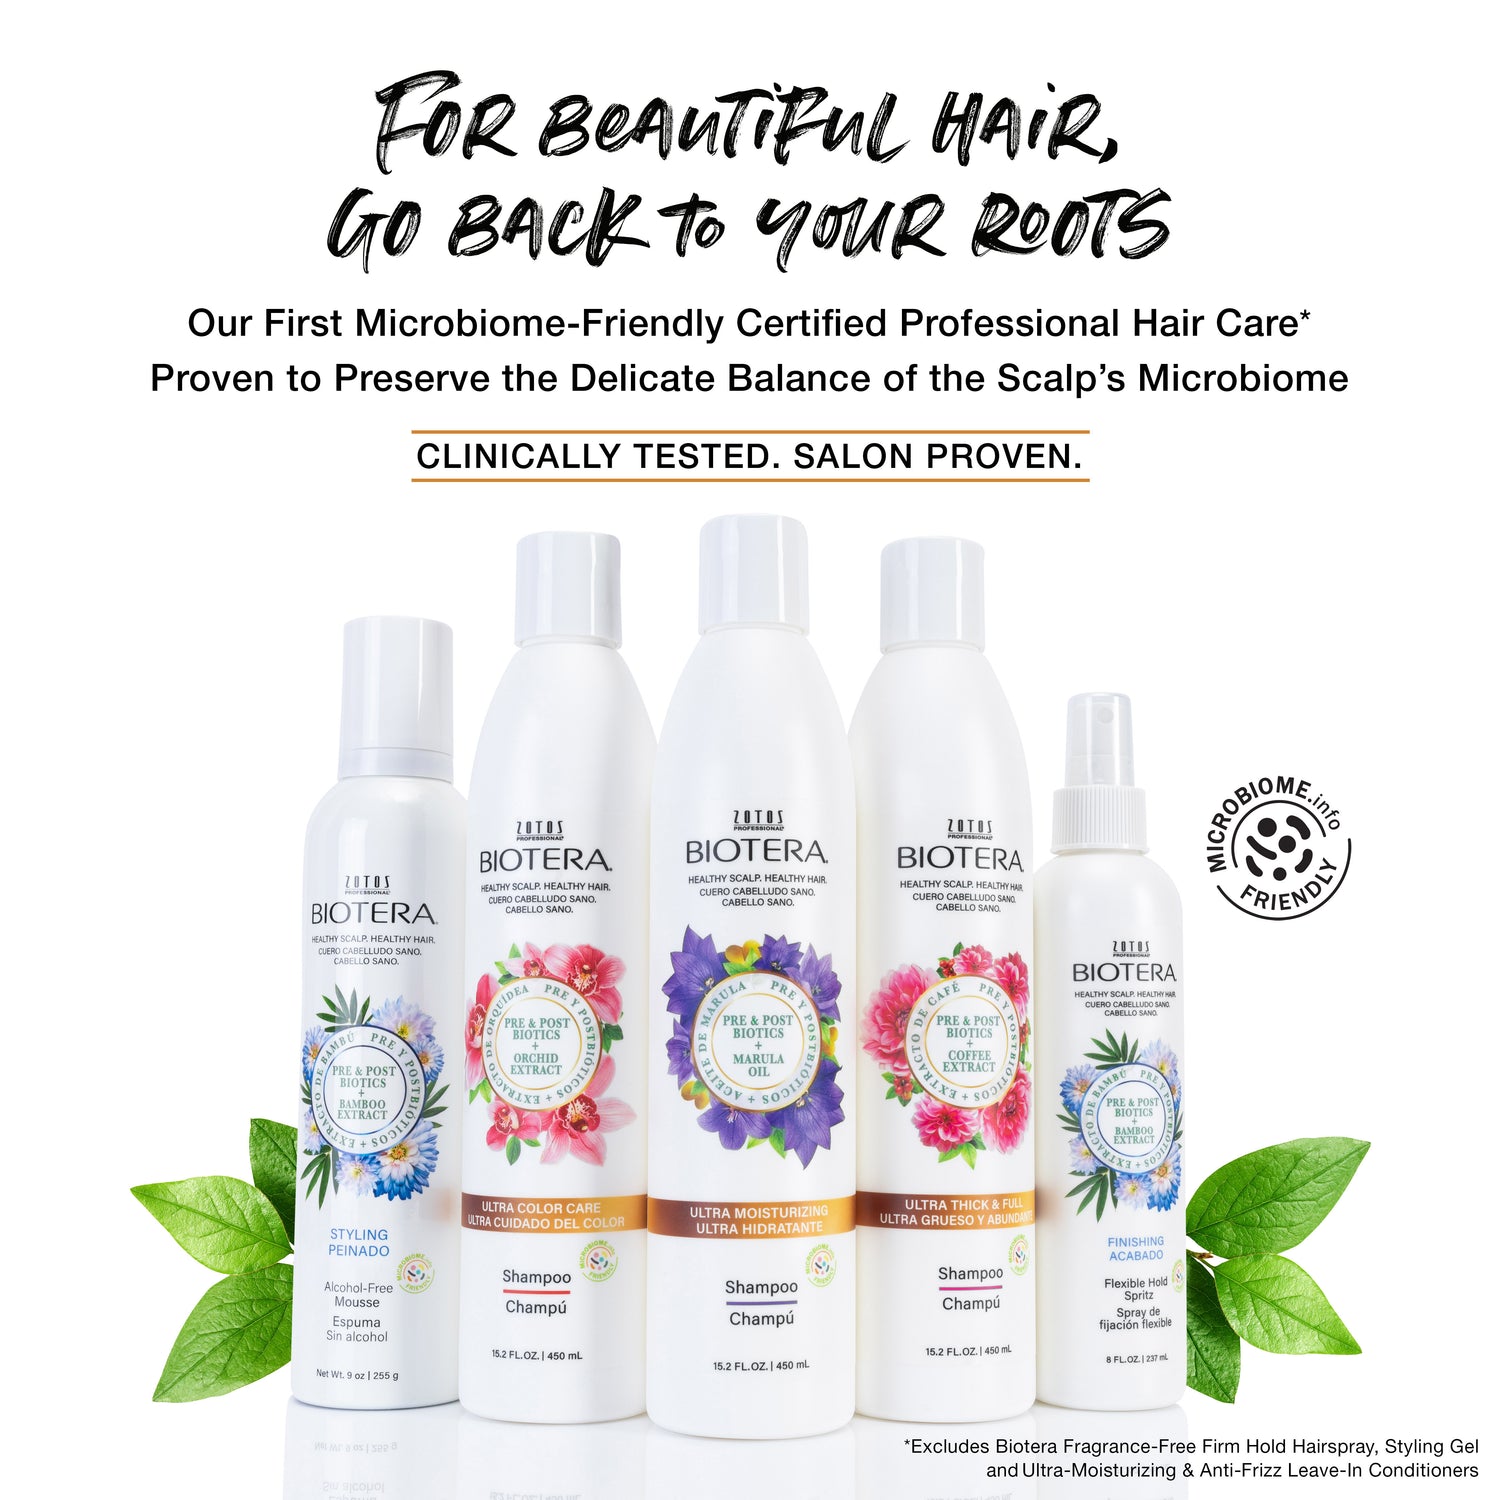 For beautiful hair, go back to your roots. Our First Microbiome-Friendly Certified Professional Hair Care(excludes biotera fragrance free firm hold hairspray, styling gel and ultra-moisturizing and anti-frizz leave in conditioners). Proven to Preserve the Delicate Balance of the Scalp's Microbiome. Clinically tested. Salon proven. 